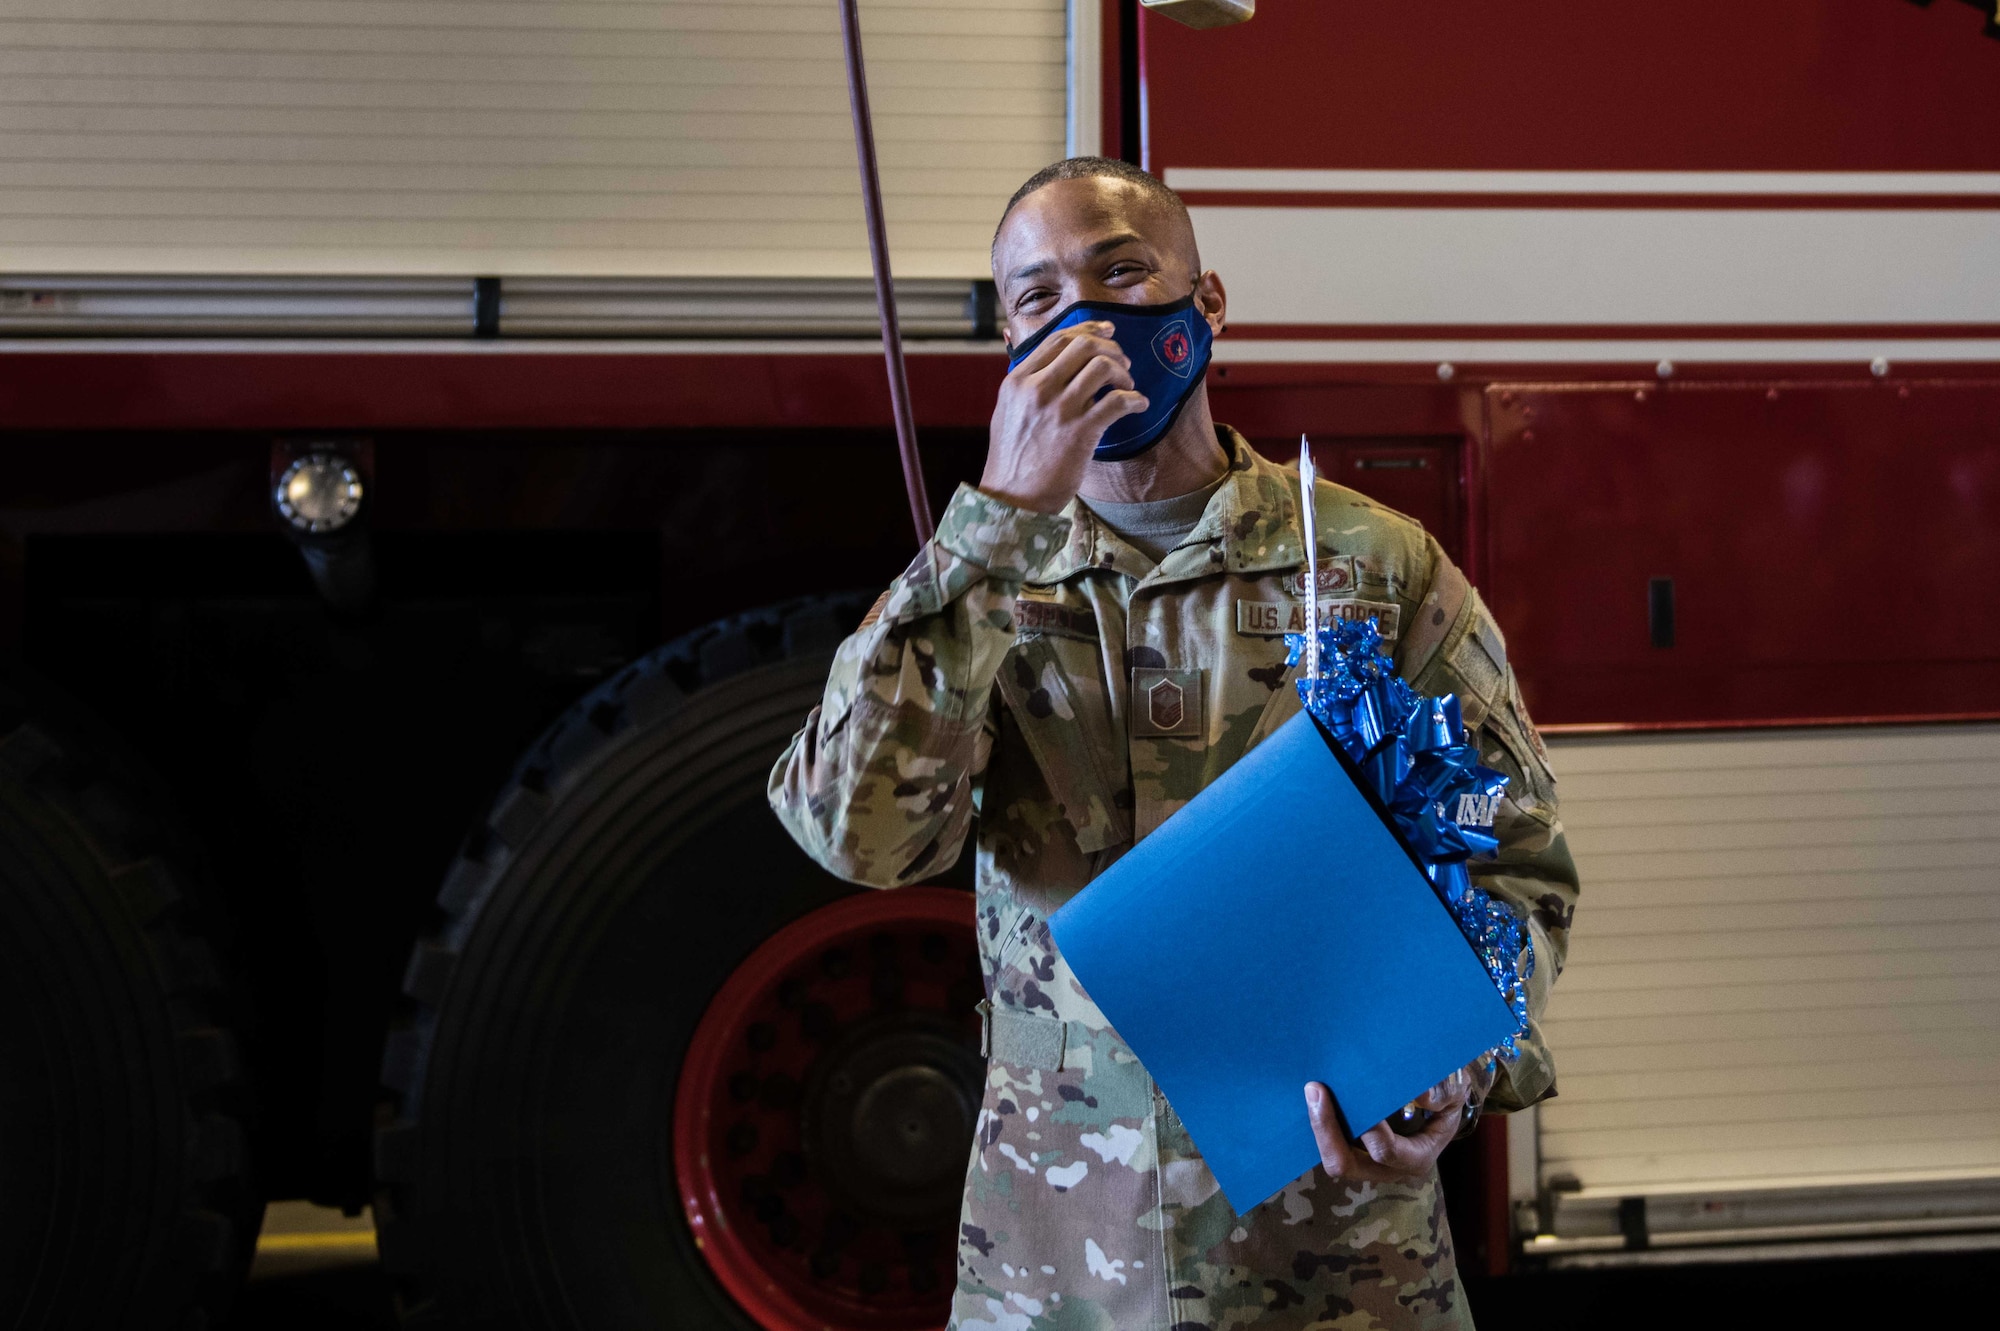 Senior Master Sgt. Shanton Russell, 22nd Civil Engineer Squadron deputy fire chief, laughs after he hears he was selected to promote Dec. 1, 2020, at McConnell Air Force Base, Kansas. Out of the 518 chief master sergeant selectees across the Air Force, two are stationed at McConnell. There was an 18.75% selection rate for this year's promotion cycle. (U.S. Air Force photo by Senior Airman Alan Ricker)